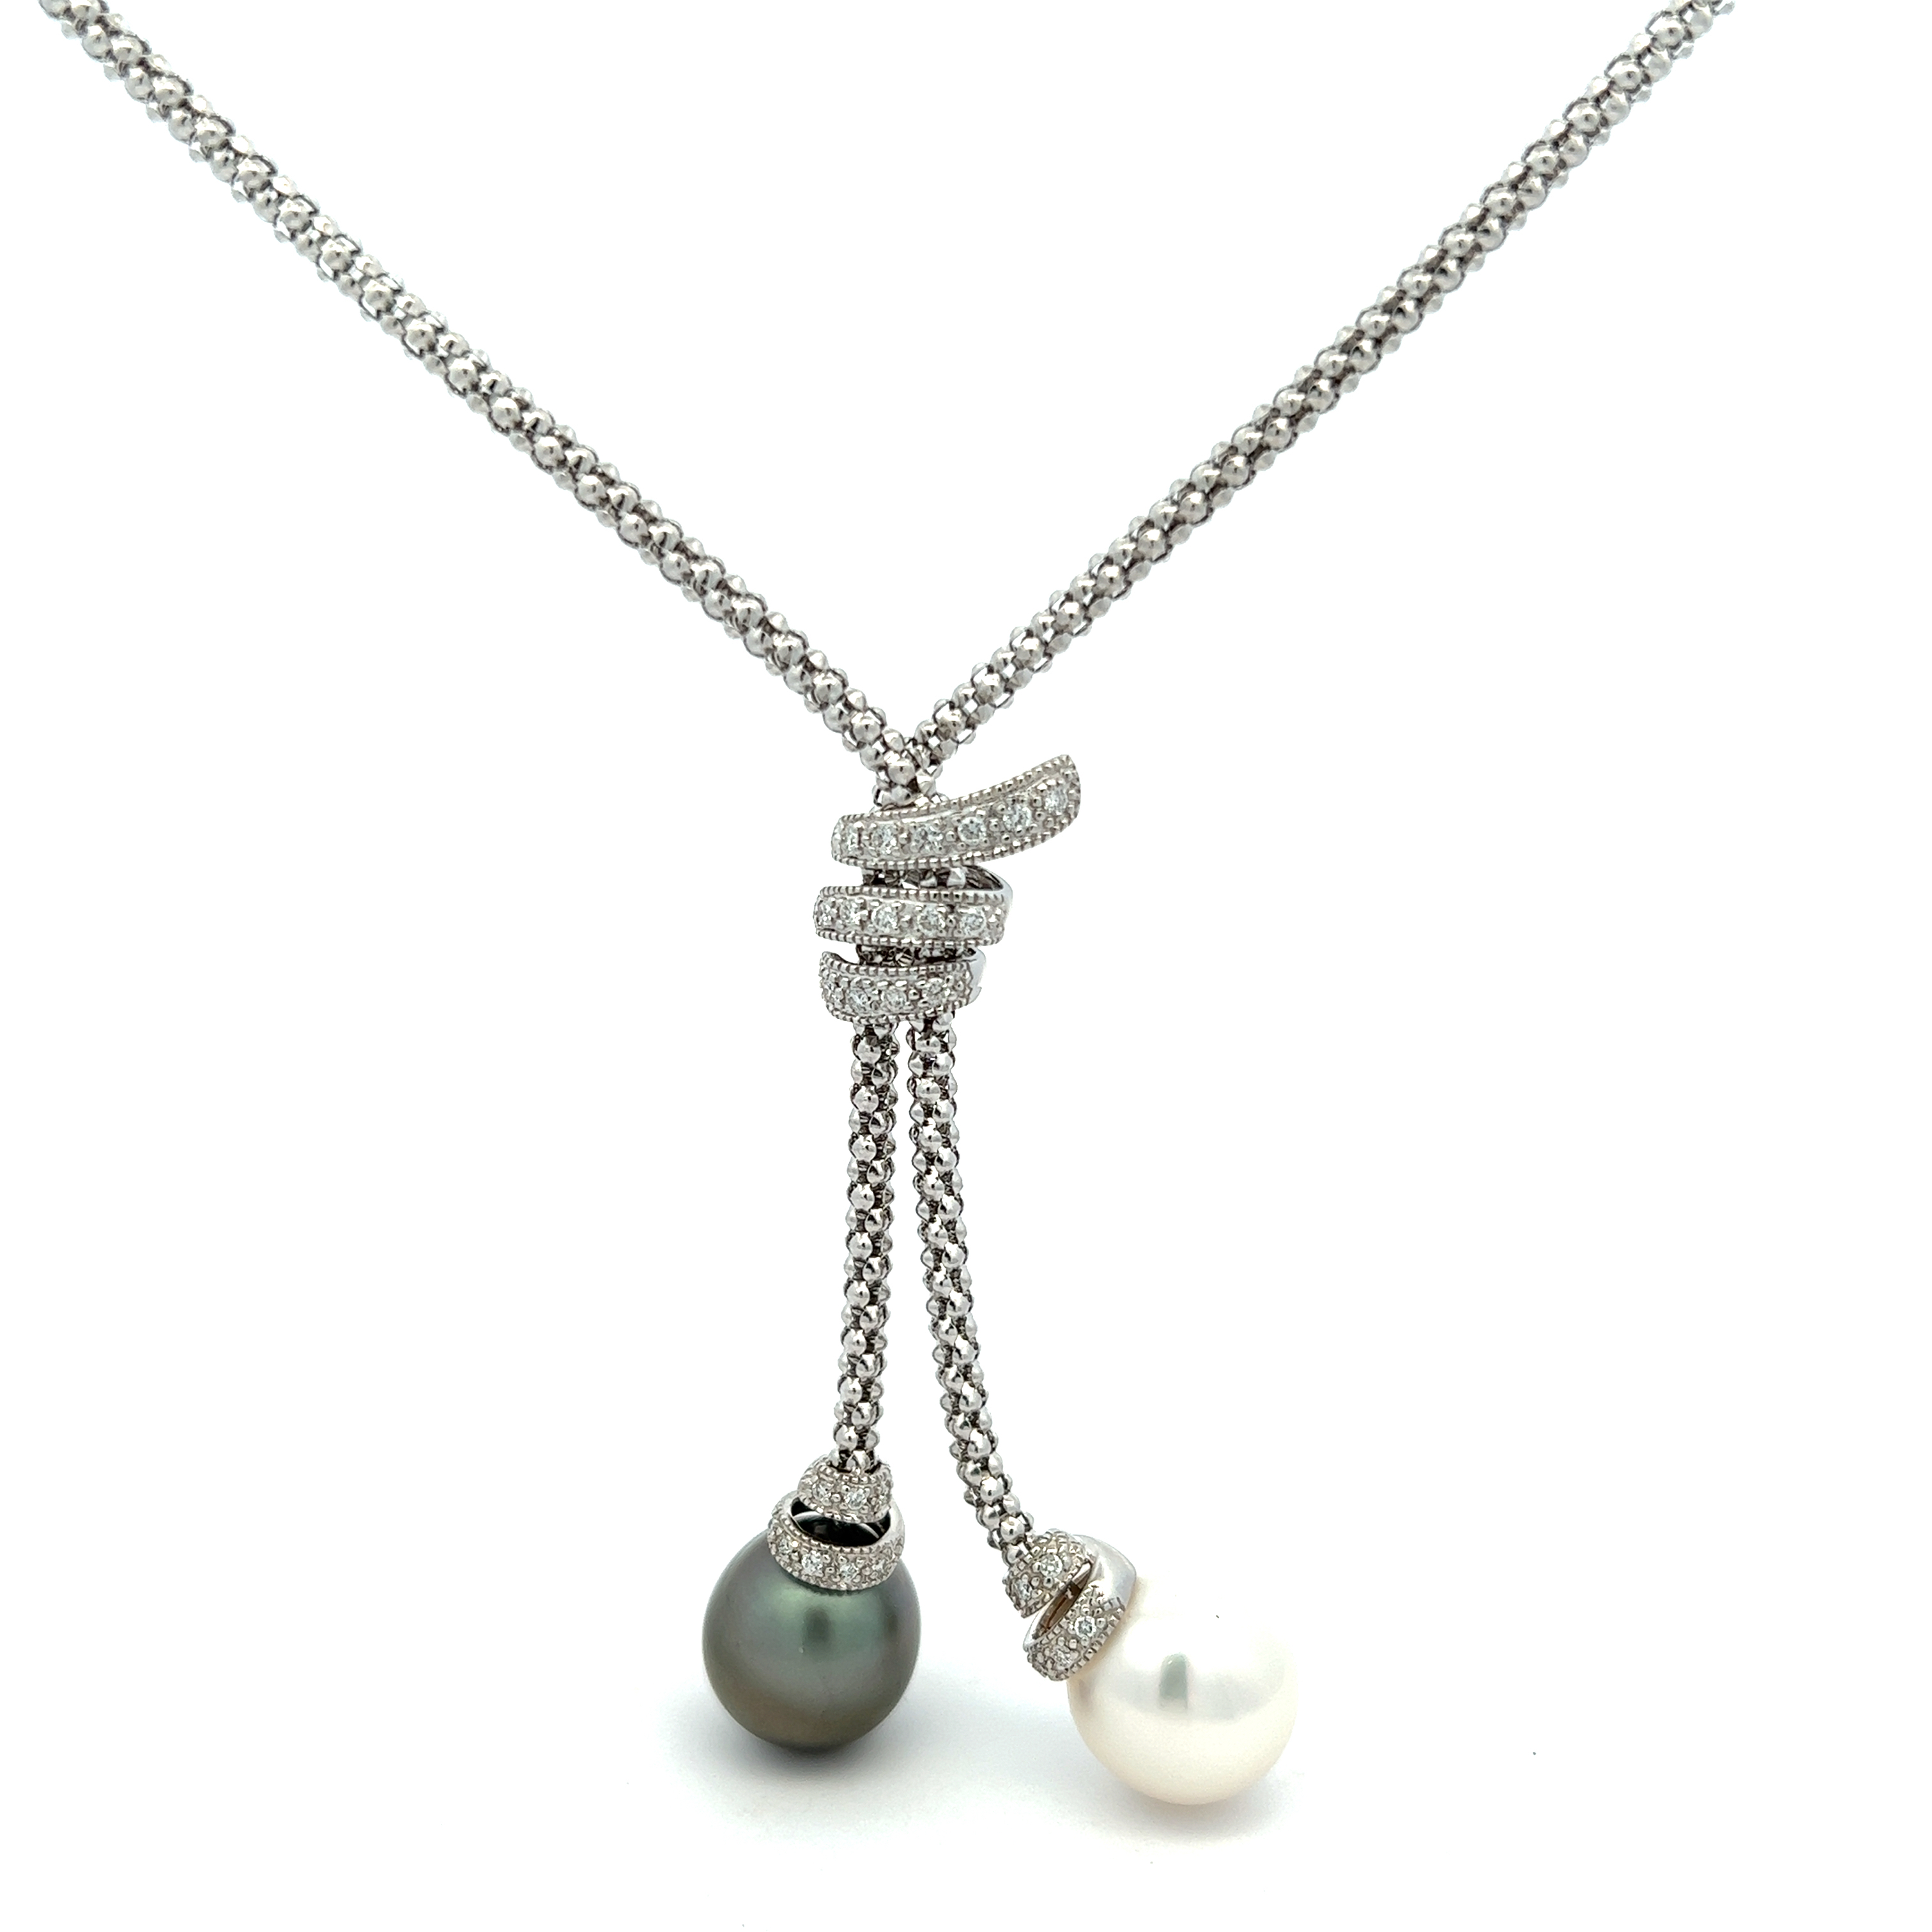 18 Karat White Gold Necklace With One 12.50mm South Sea Pearl, One 12.60mm Tahitian Pearl And 31=0.30 Total Weight Round Brilliant G Si Diamonds